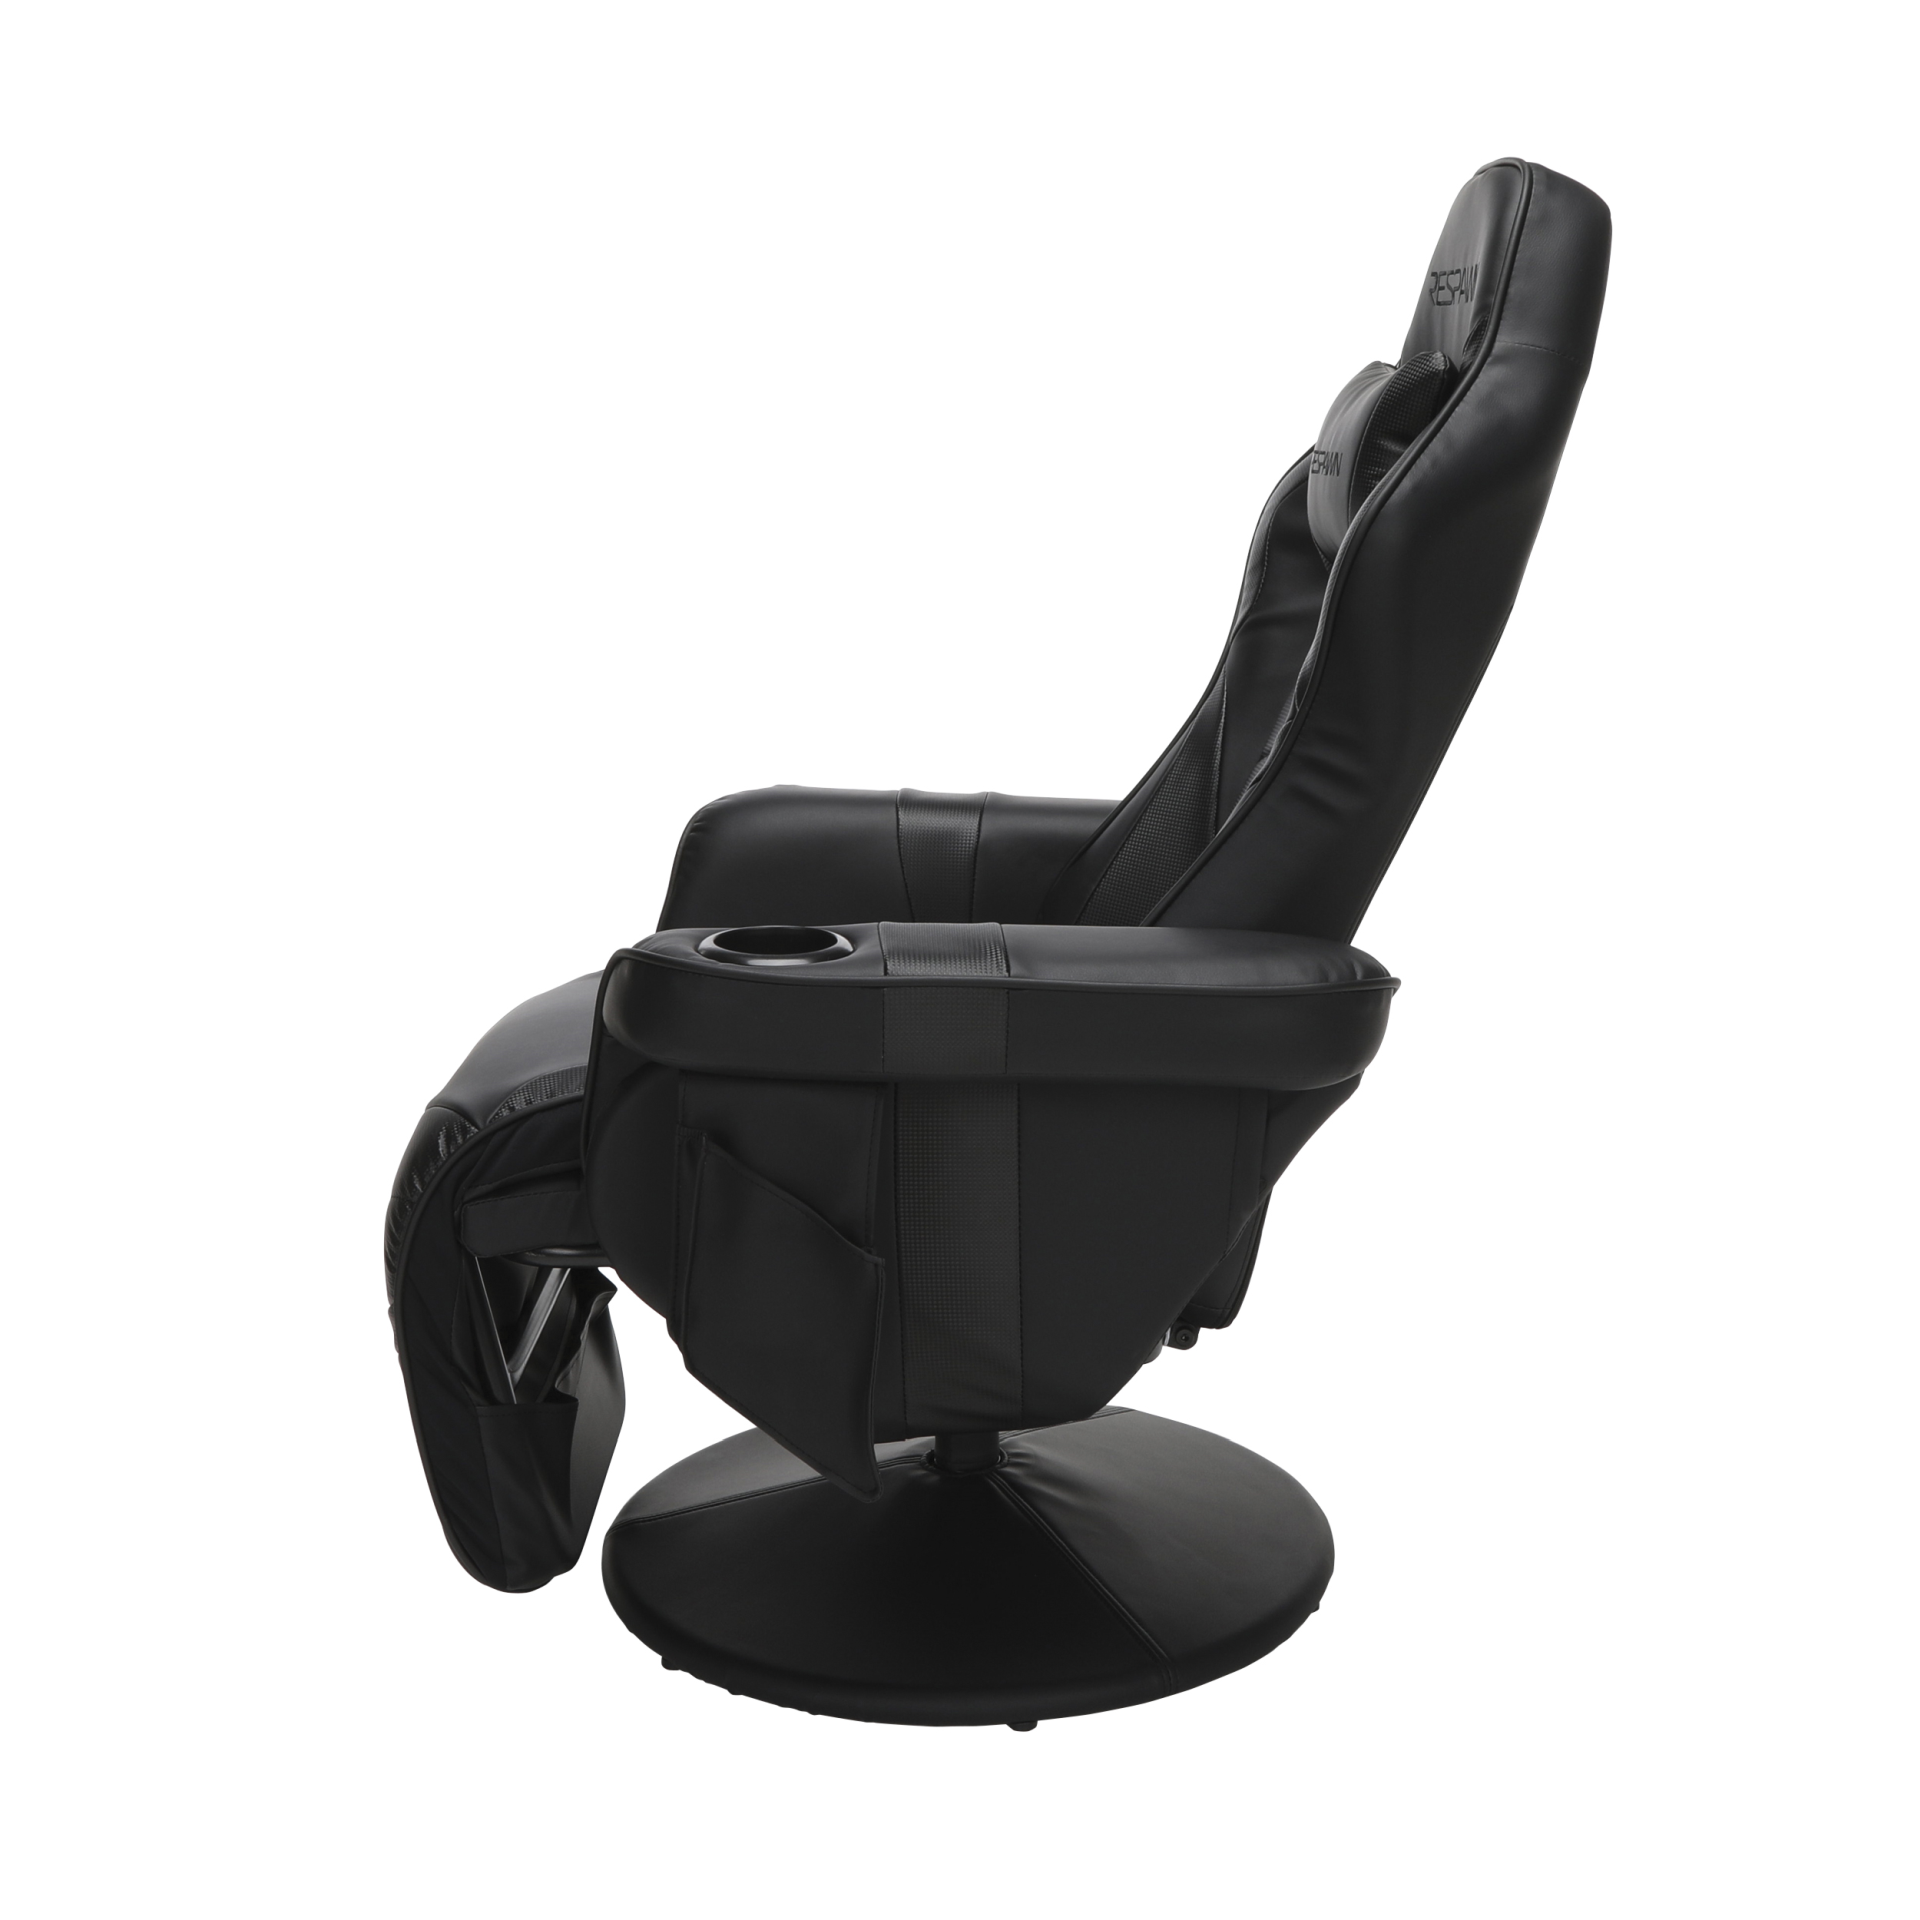 RESPAWN RSP-900 Gaming Recliner #3